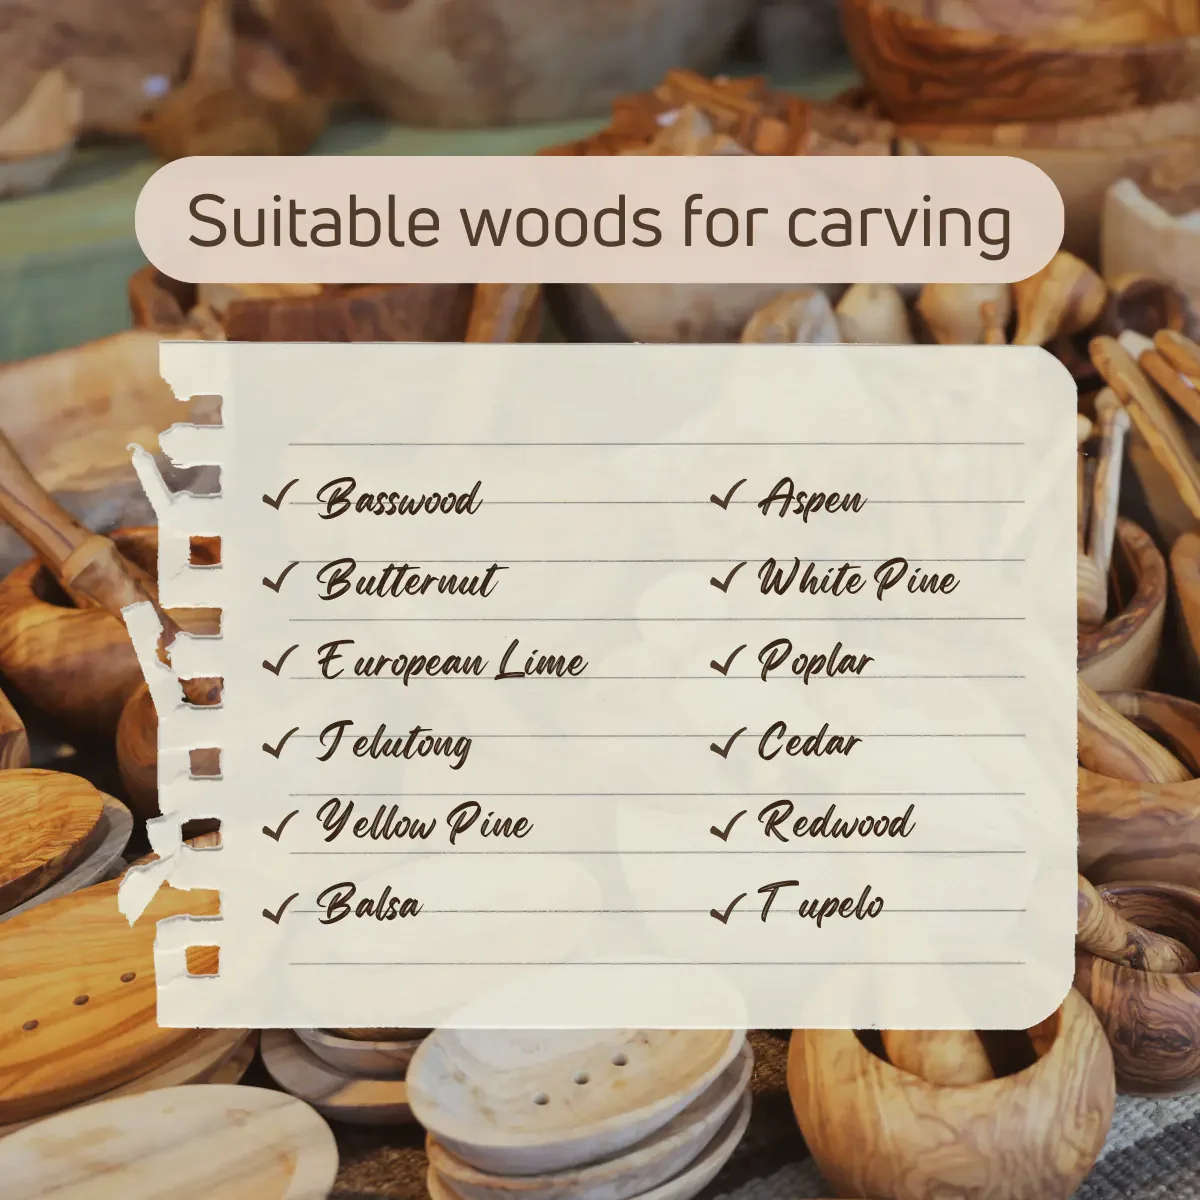 Suitable woods for carving